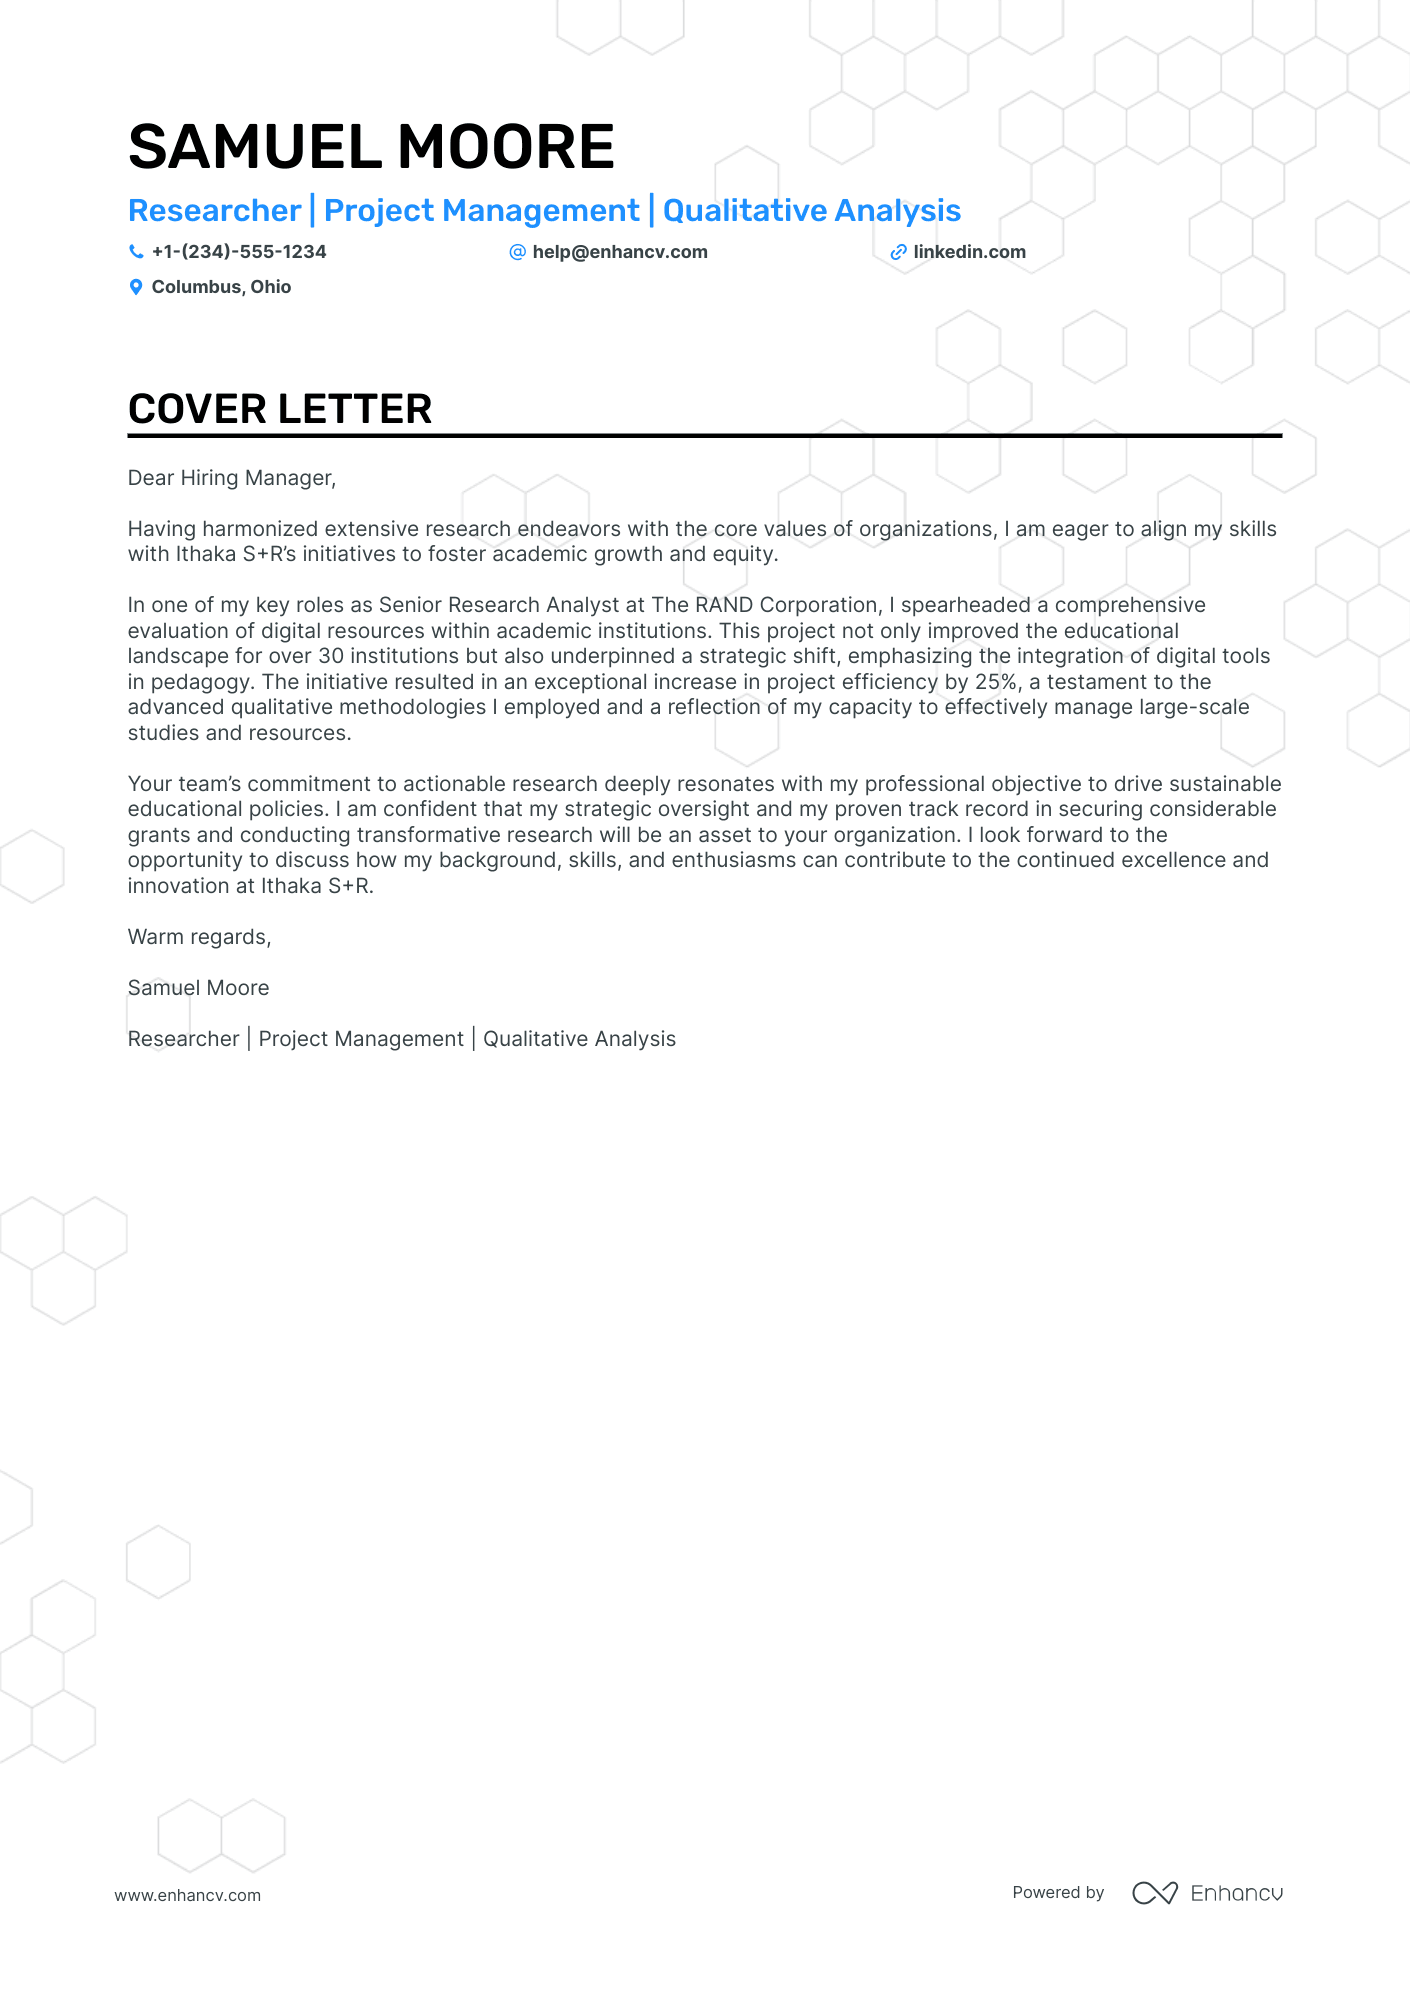 Researcher cover letter